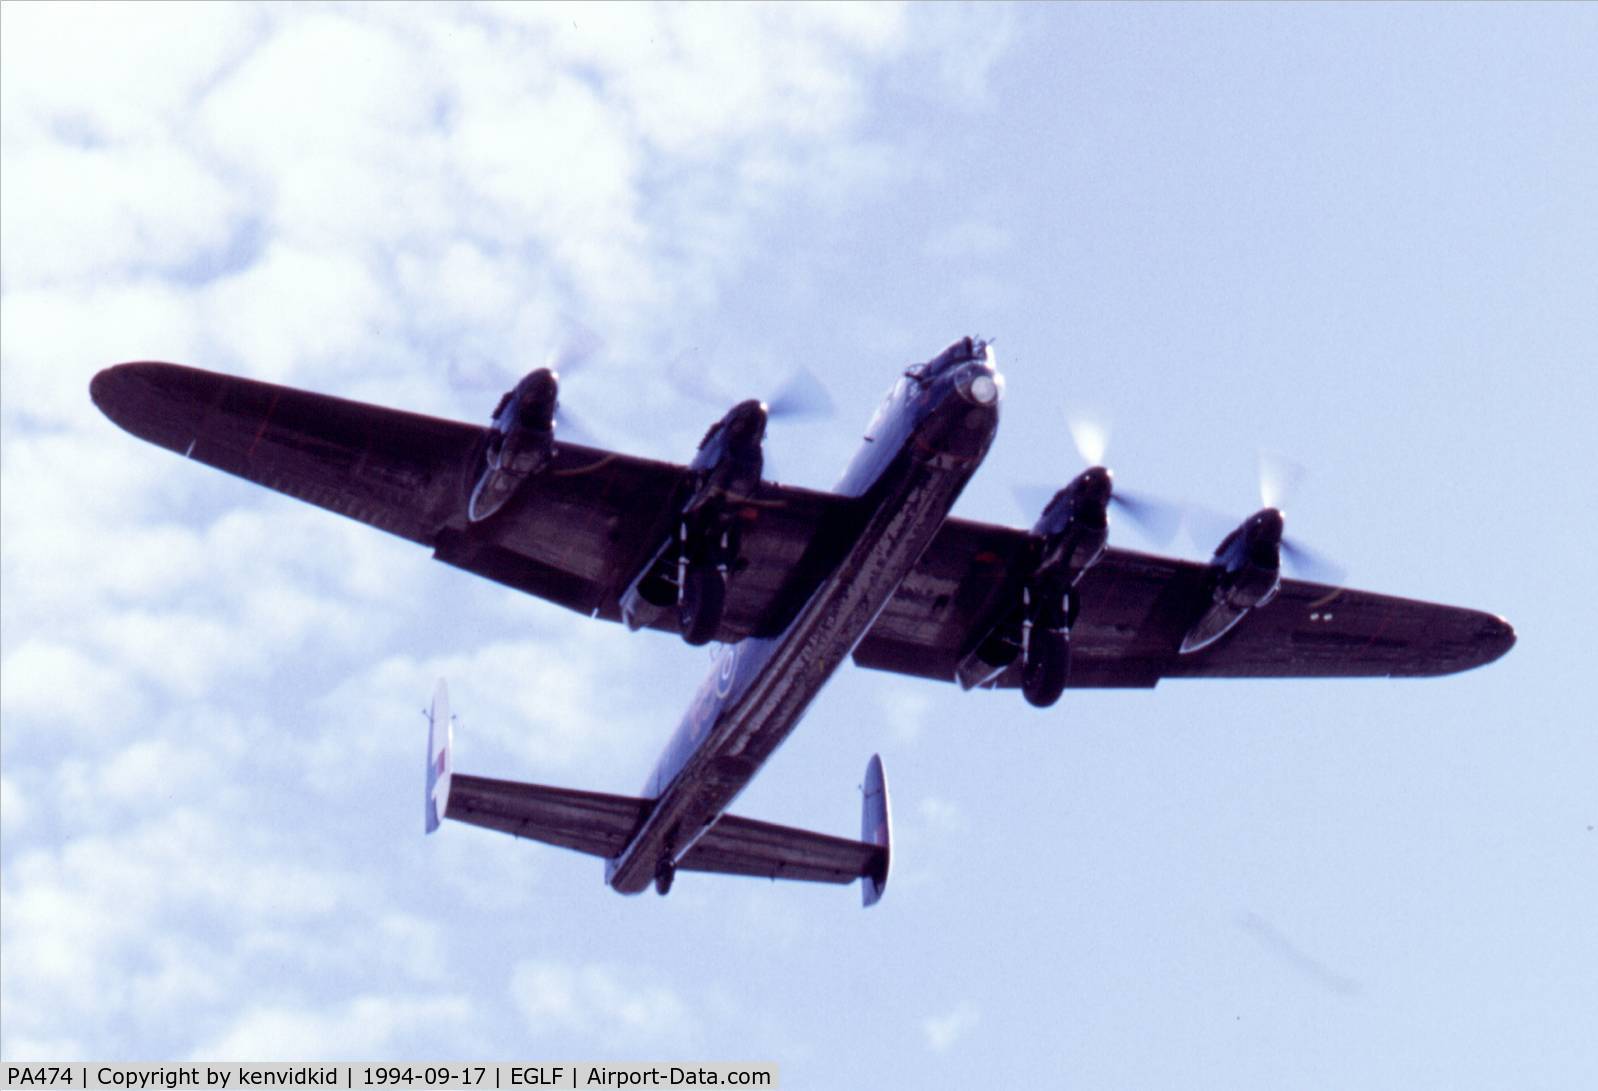 PA474, 1945 Avro 683 Lancaster B1 C/N VACH0052/D2973, At the 1994 Farnborough International Air Show. Scanned from slide.